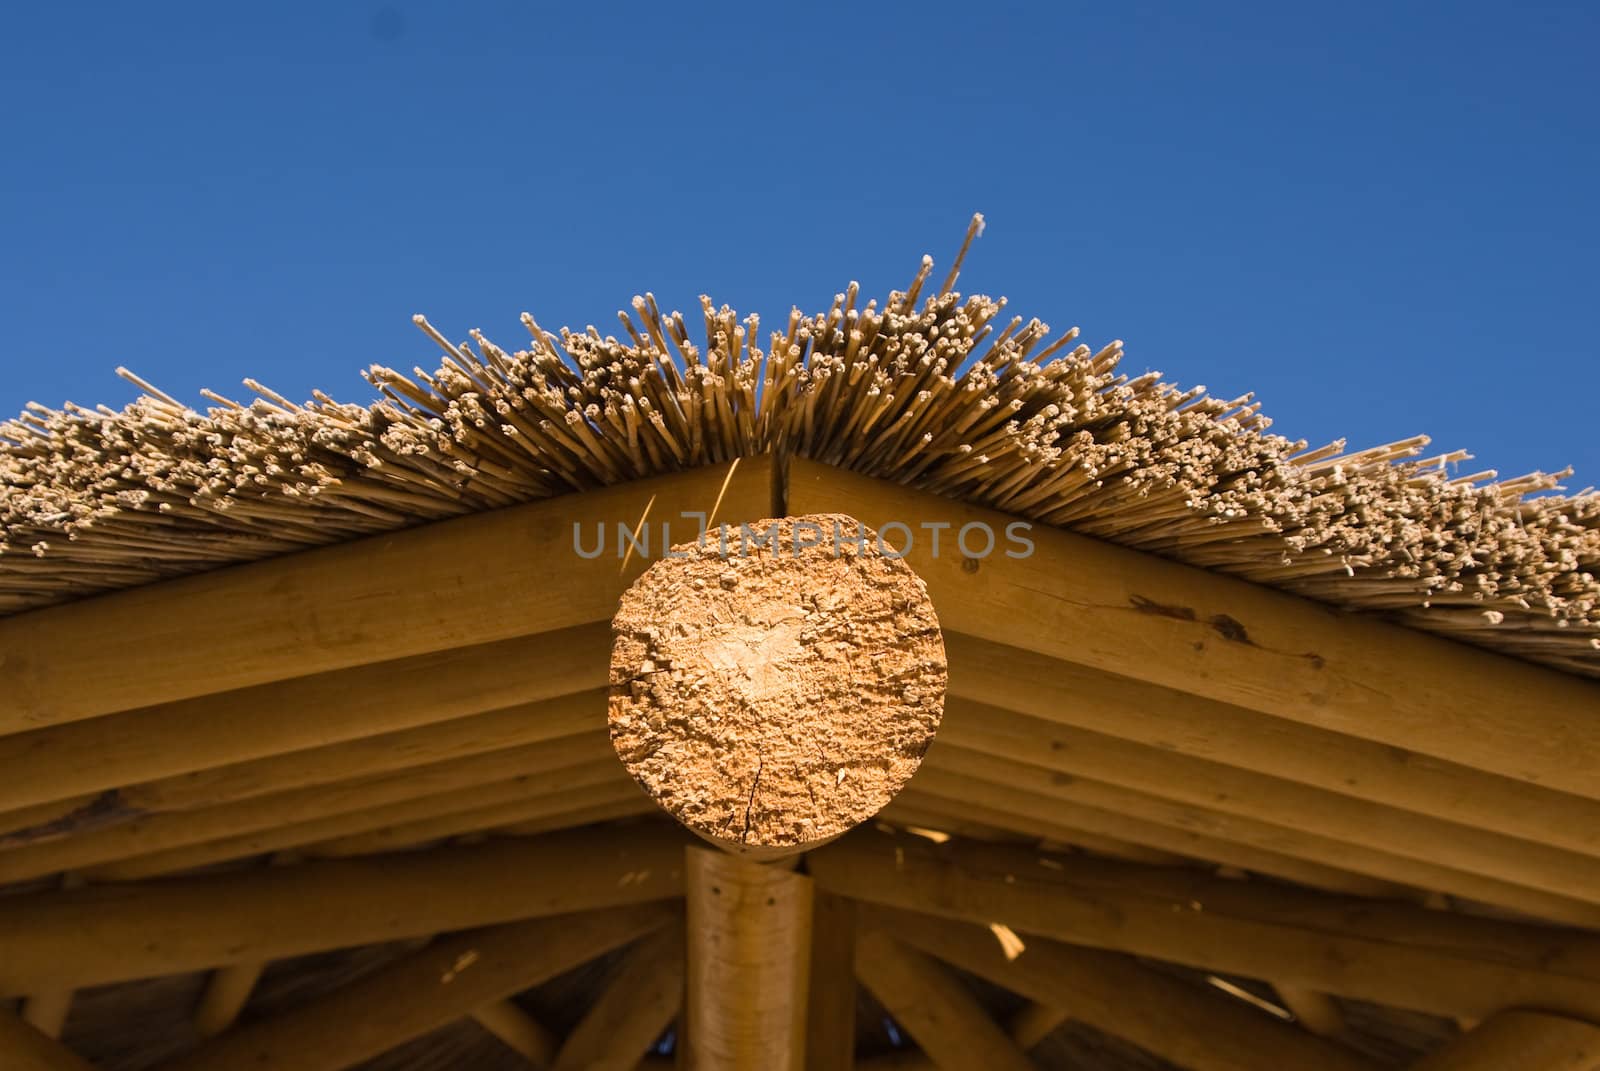 Palapa roof by emattil